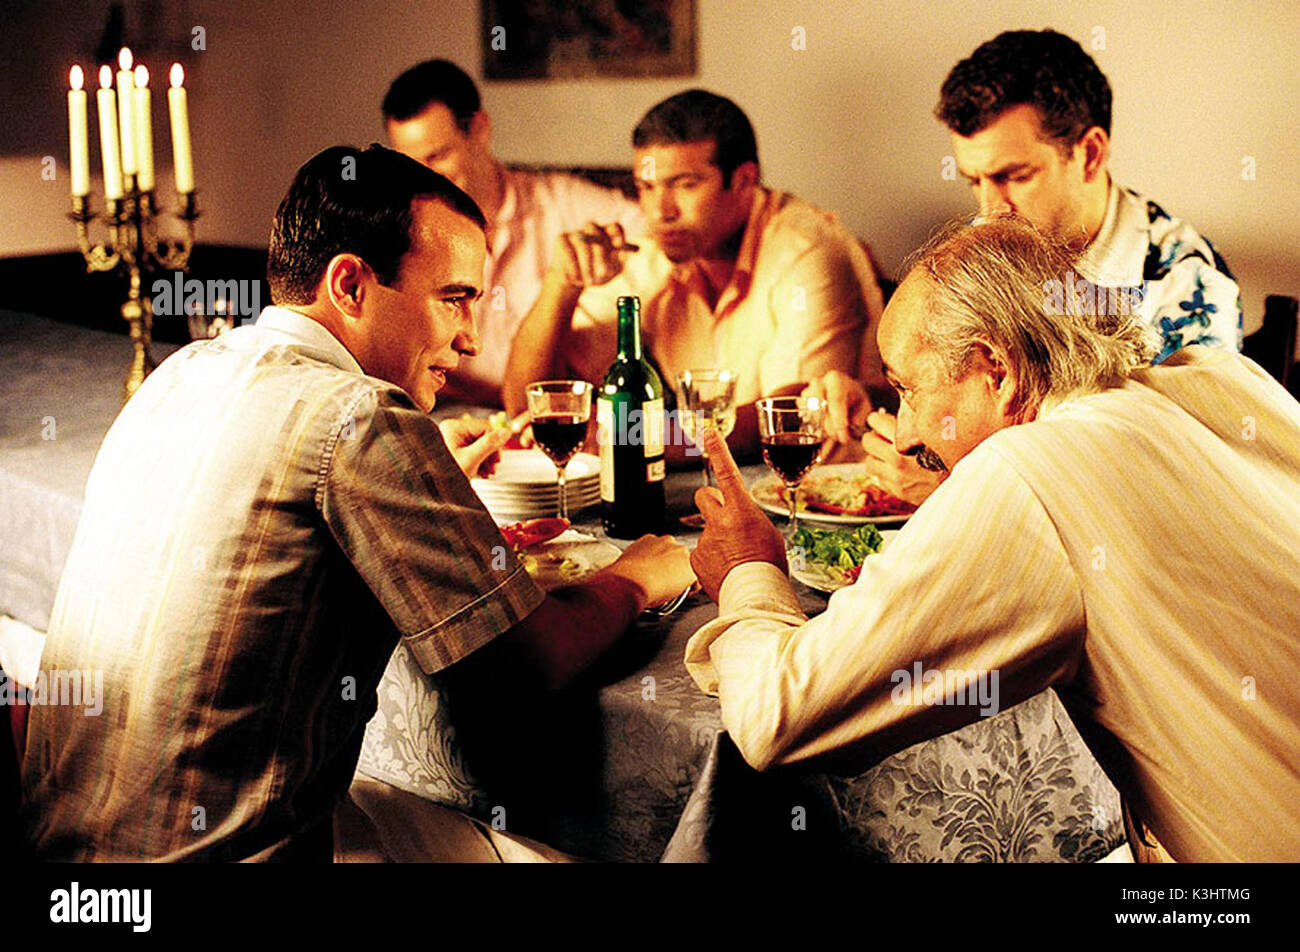 THE BUSINESS Roland Manookian as Sonny, Arturo Venegas as The Mayor, Danny Dyer as Sammy and Tamer Hassan as Charlie.     Date: 2005 Stock Photo